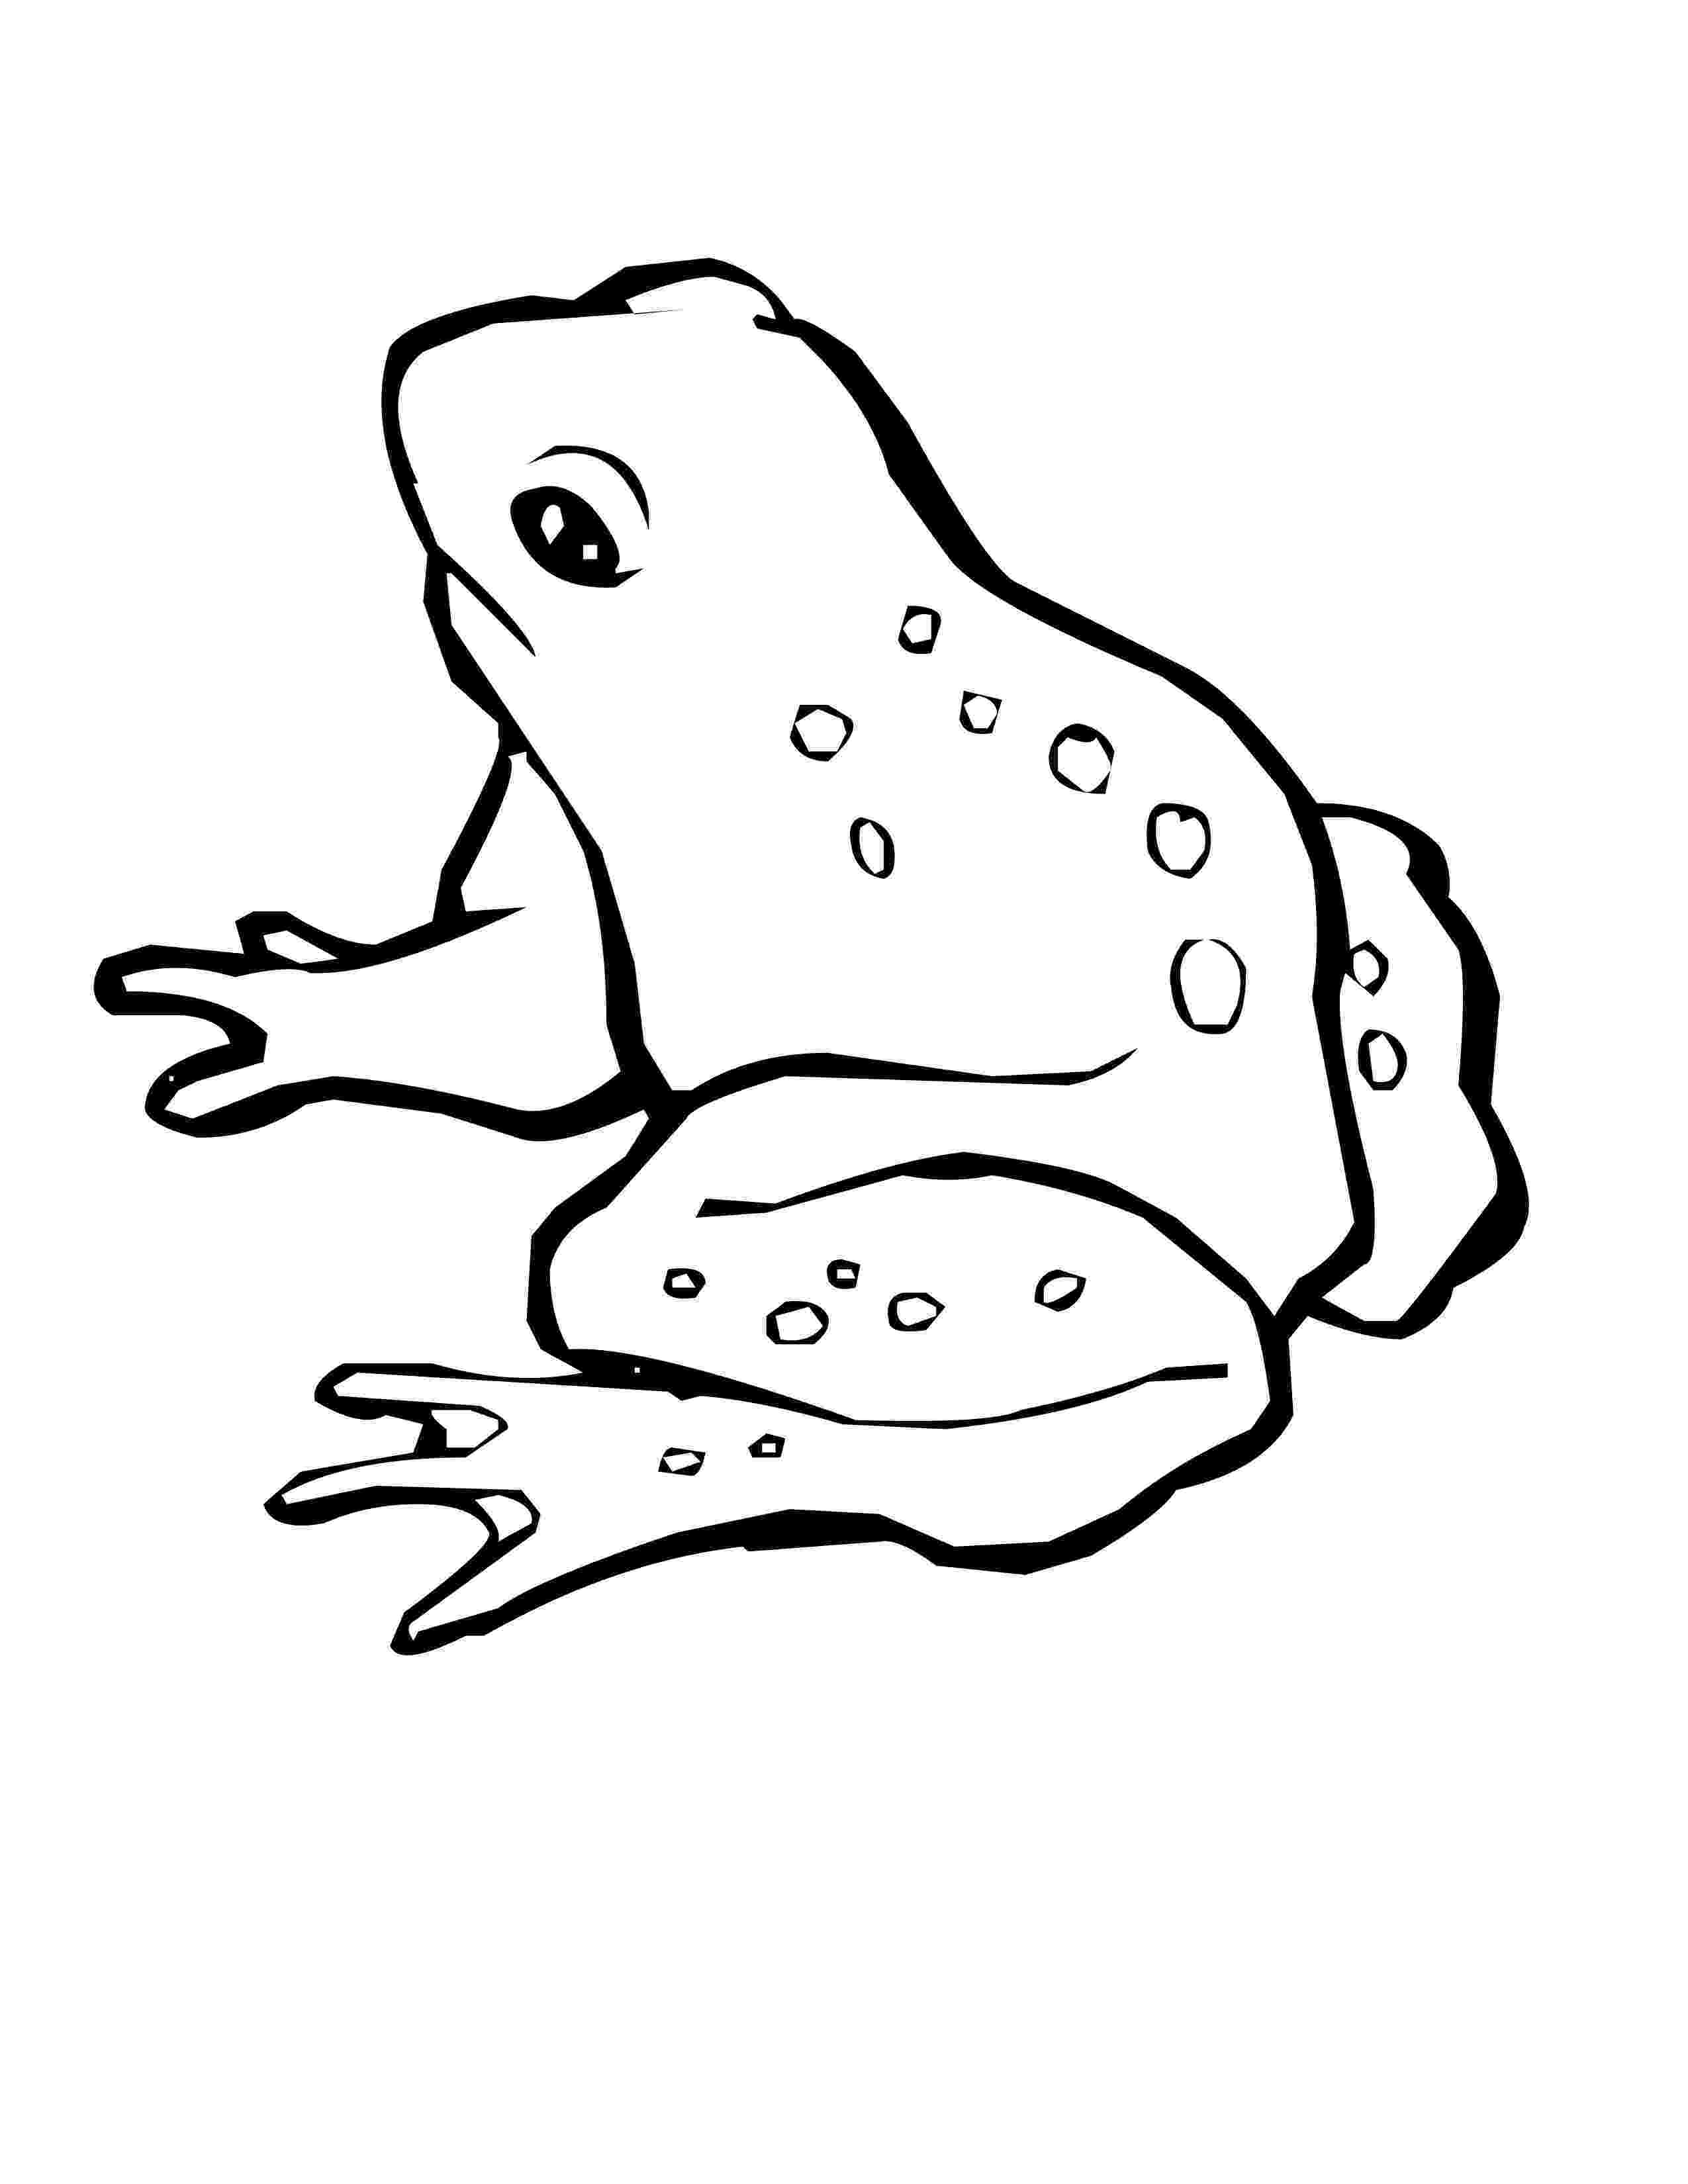 frogs coloring pages print download frog coloring pages theme for kids pages coloring frogs 